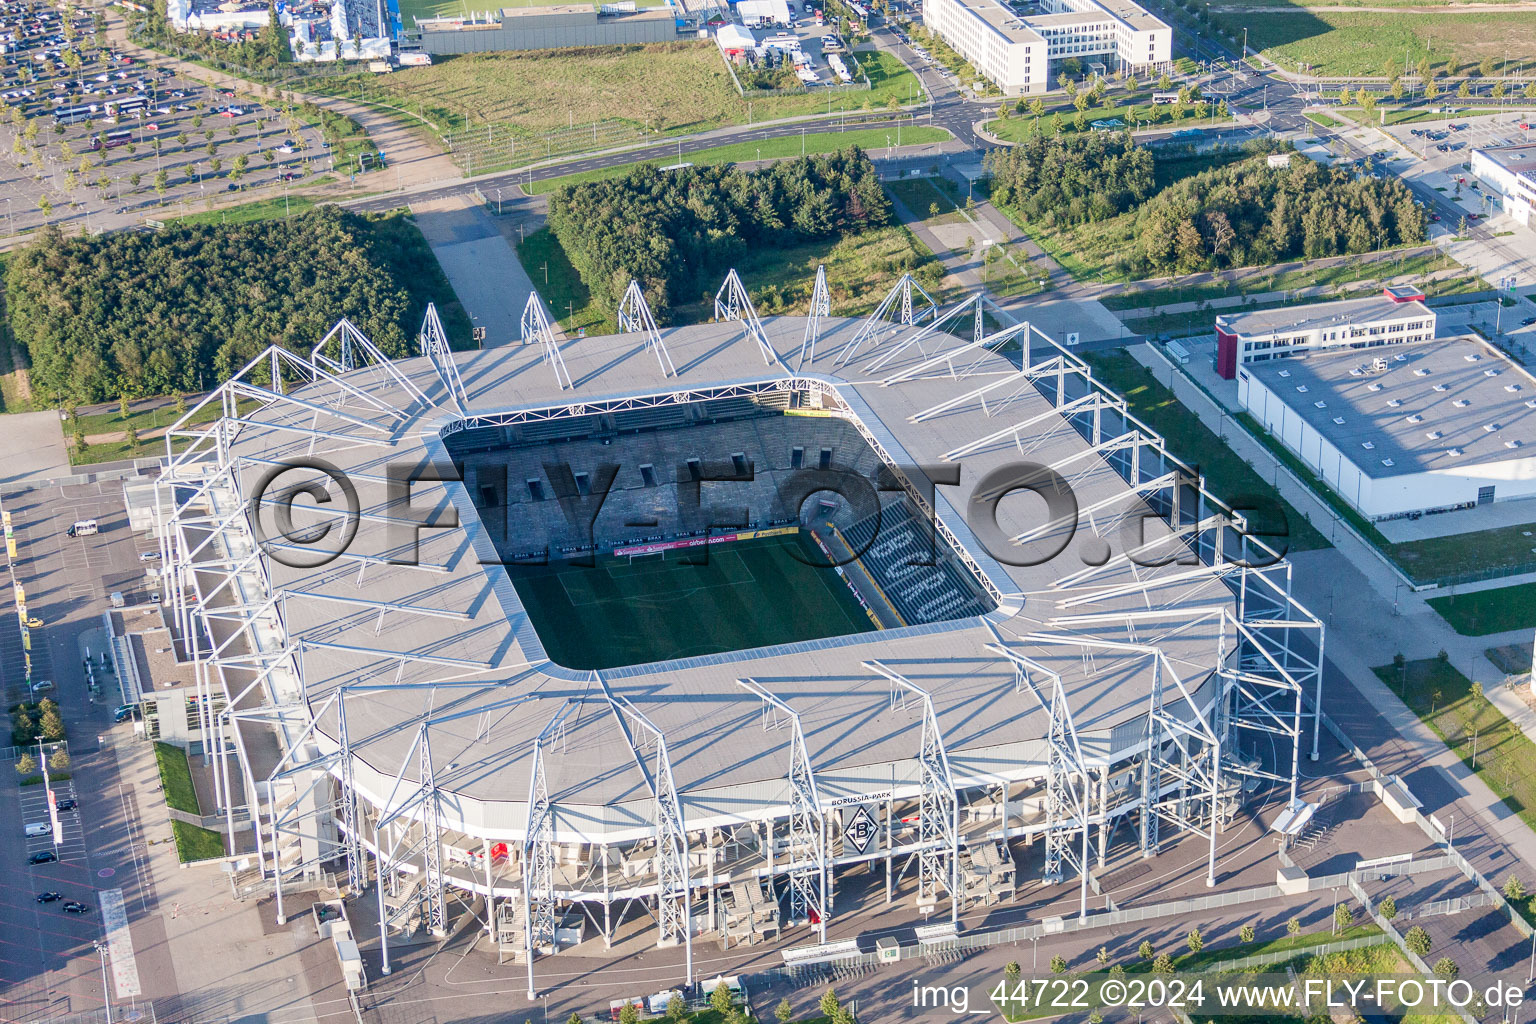 Sports facility grounds of the Arena stadium BORUSSIA-PARK in Moenchengladbach in the state North Rhine-Westphalia, Germany